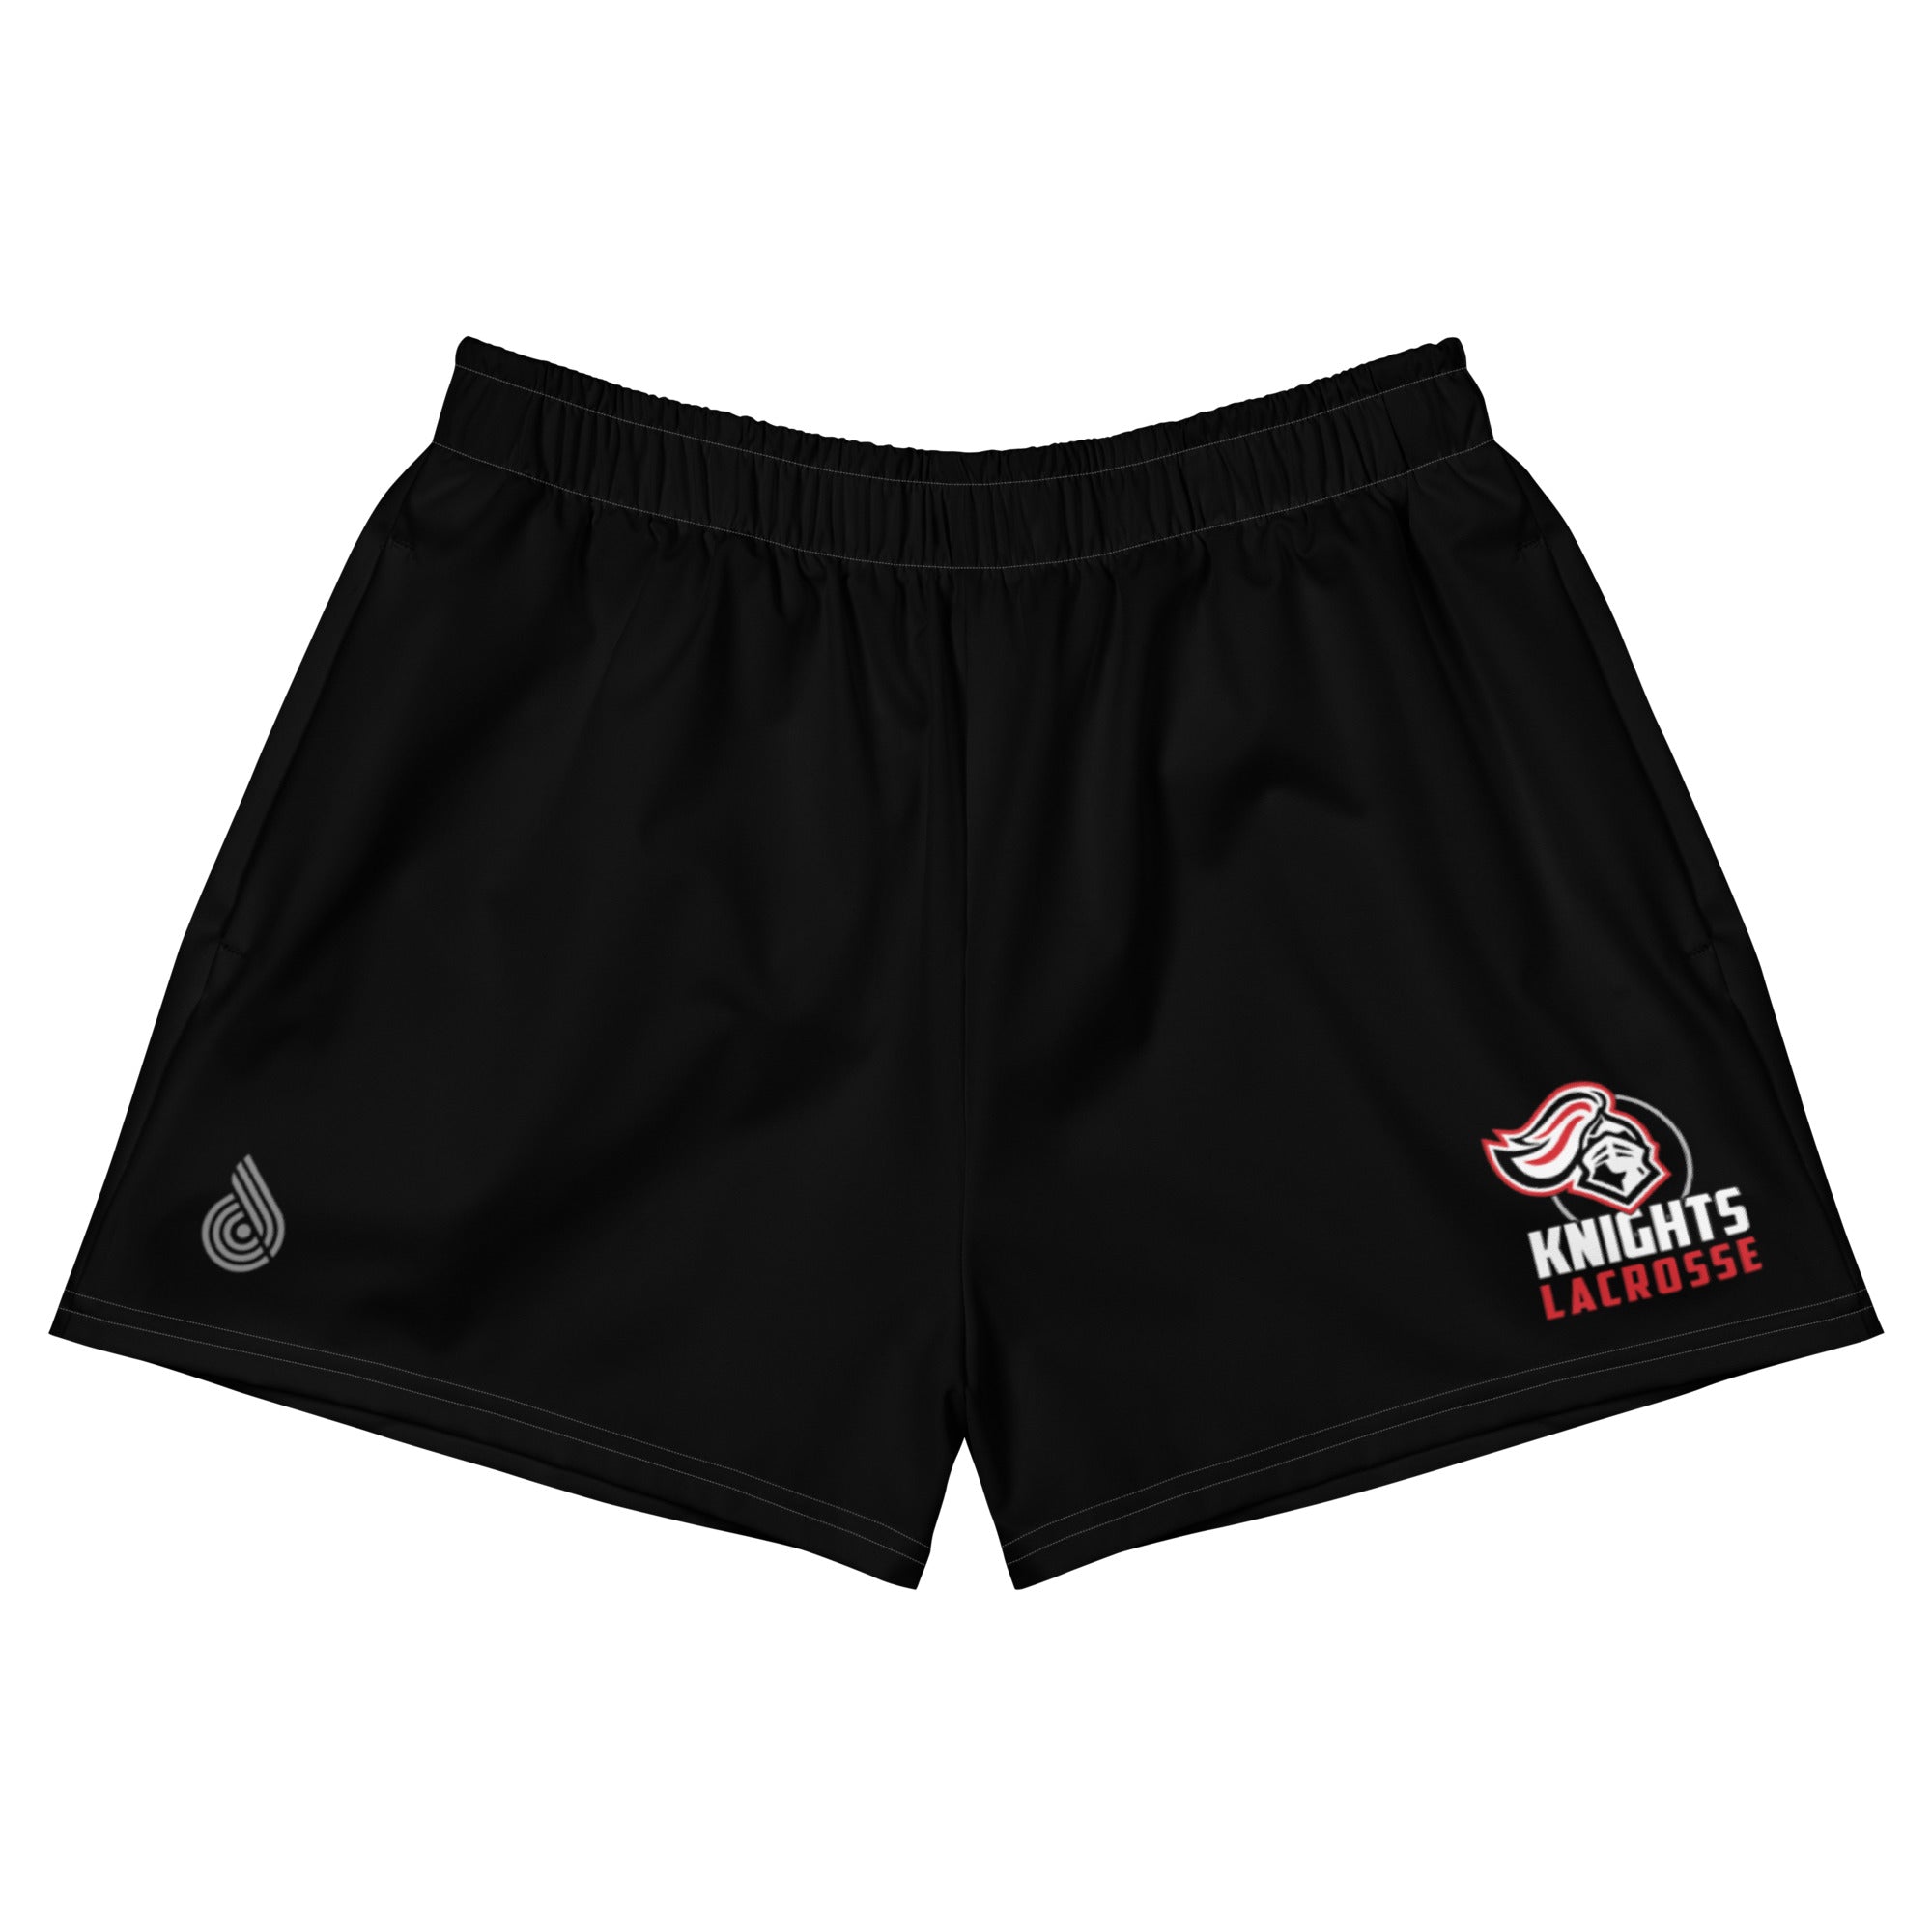 North Andover Women’s Athletic Shorts